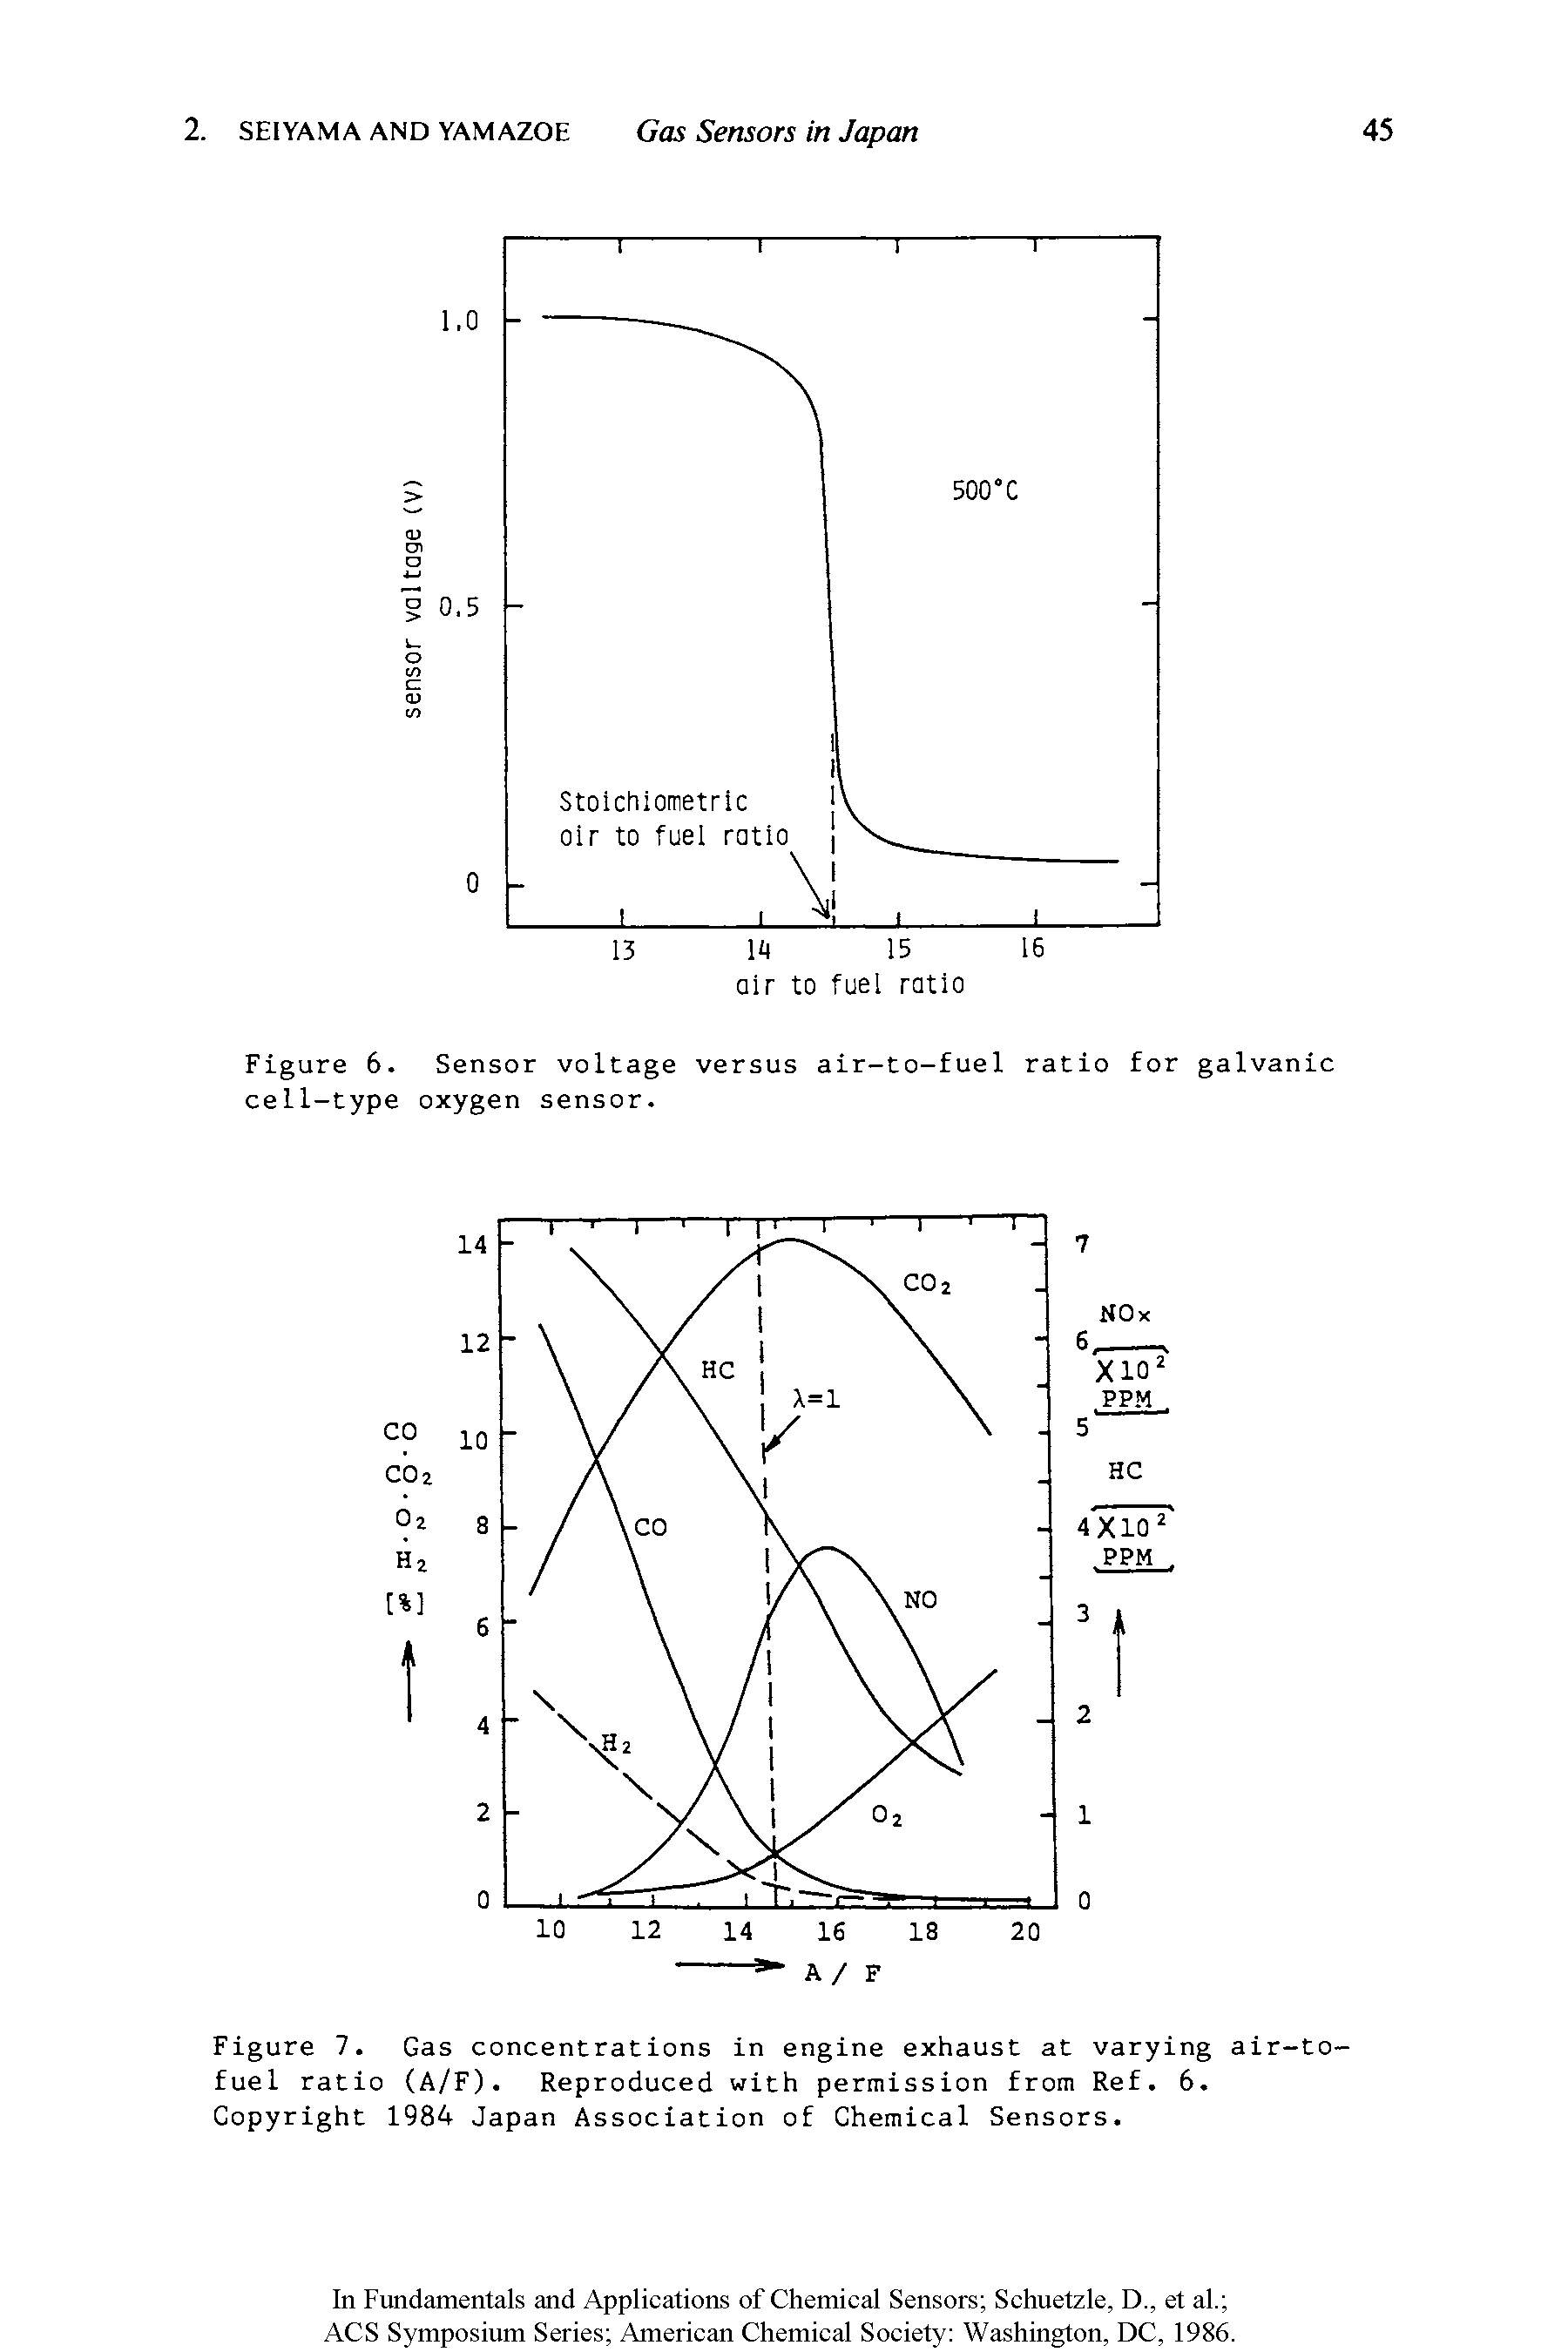 Figure 7. Gas concentrations in engine exhaust at varying air-to-fuel ratio (A/F). Reproduced with permission from Ref. 6. Copyright 1984 Japan Association of Chemical Sensors.